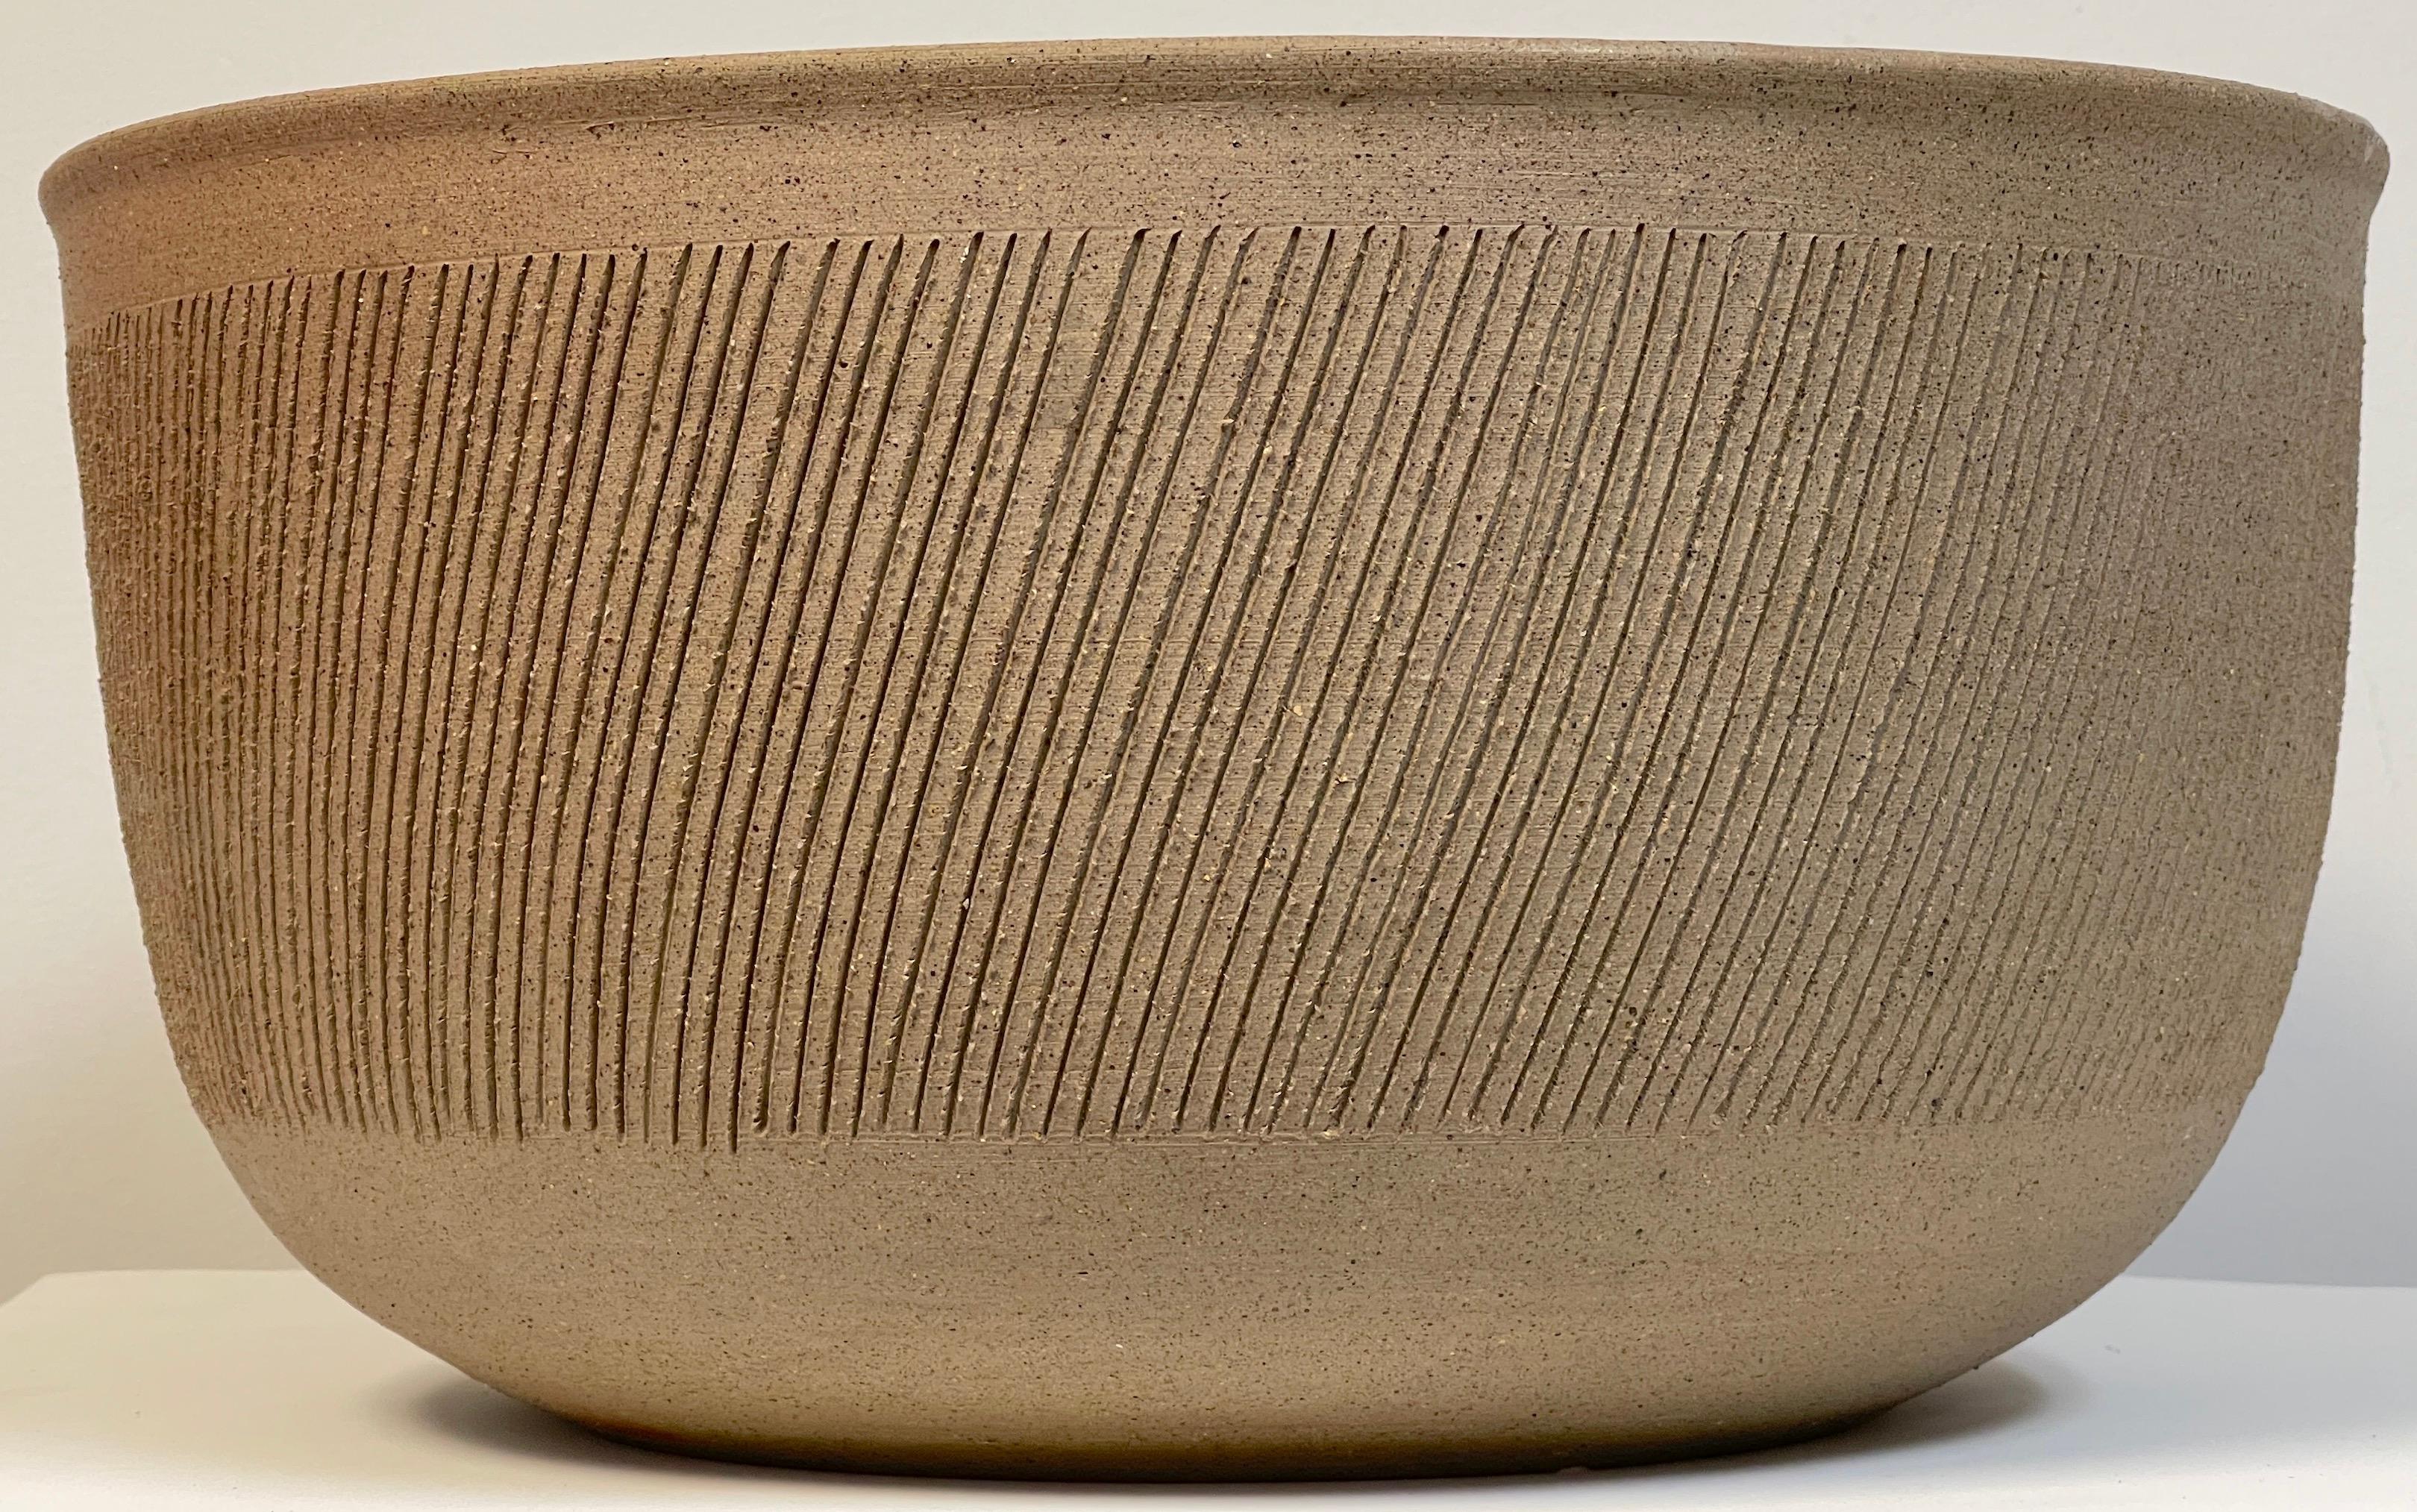 Bruno Gambone large incised pottery centerbowl, circa 1970s
Bruno Gambone is an Italian ceramicist and painter, born in 1936. The son of Guido Gambone, (1909-1969) the renowned ceramic artists of the 20th century, 
After Guido Gambone,'s death in